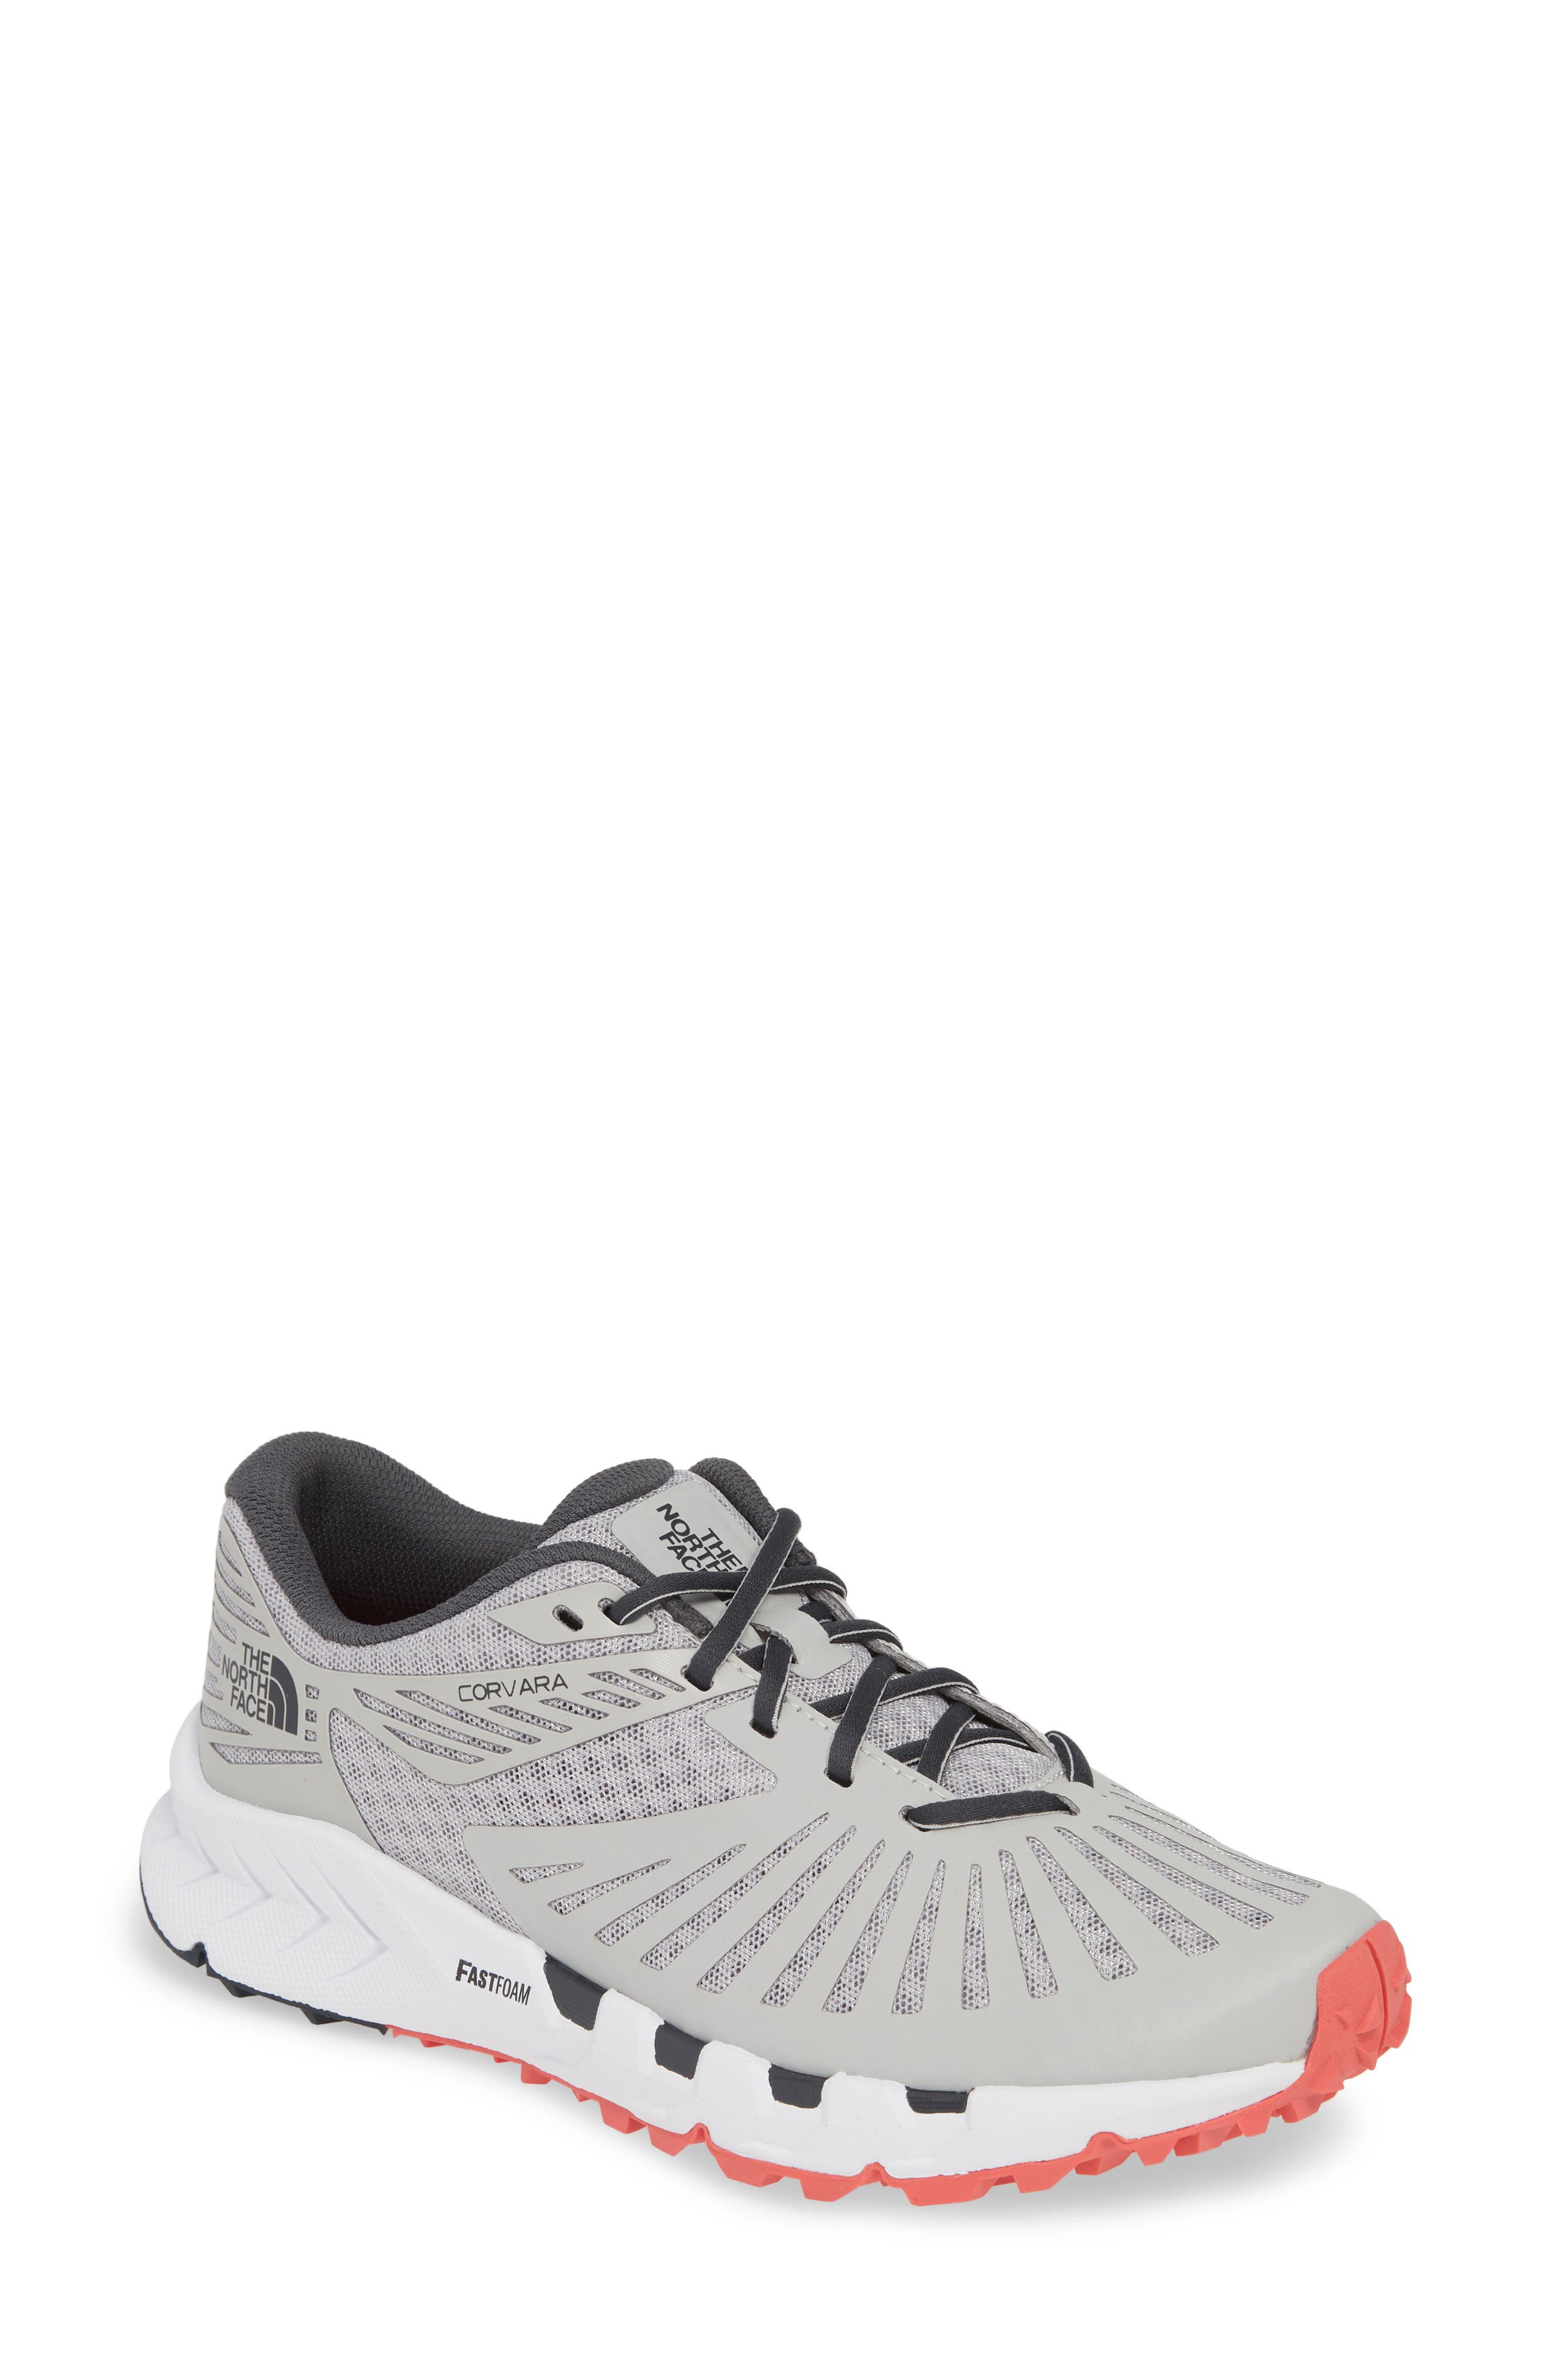 north face running shoes womens